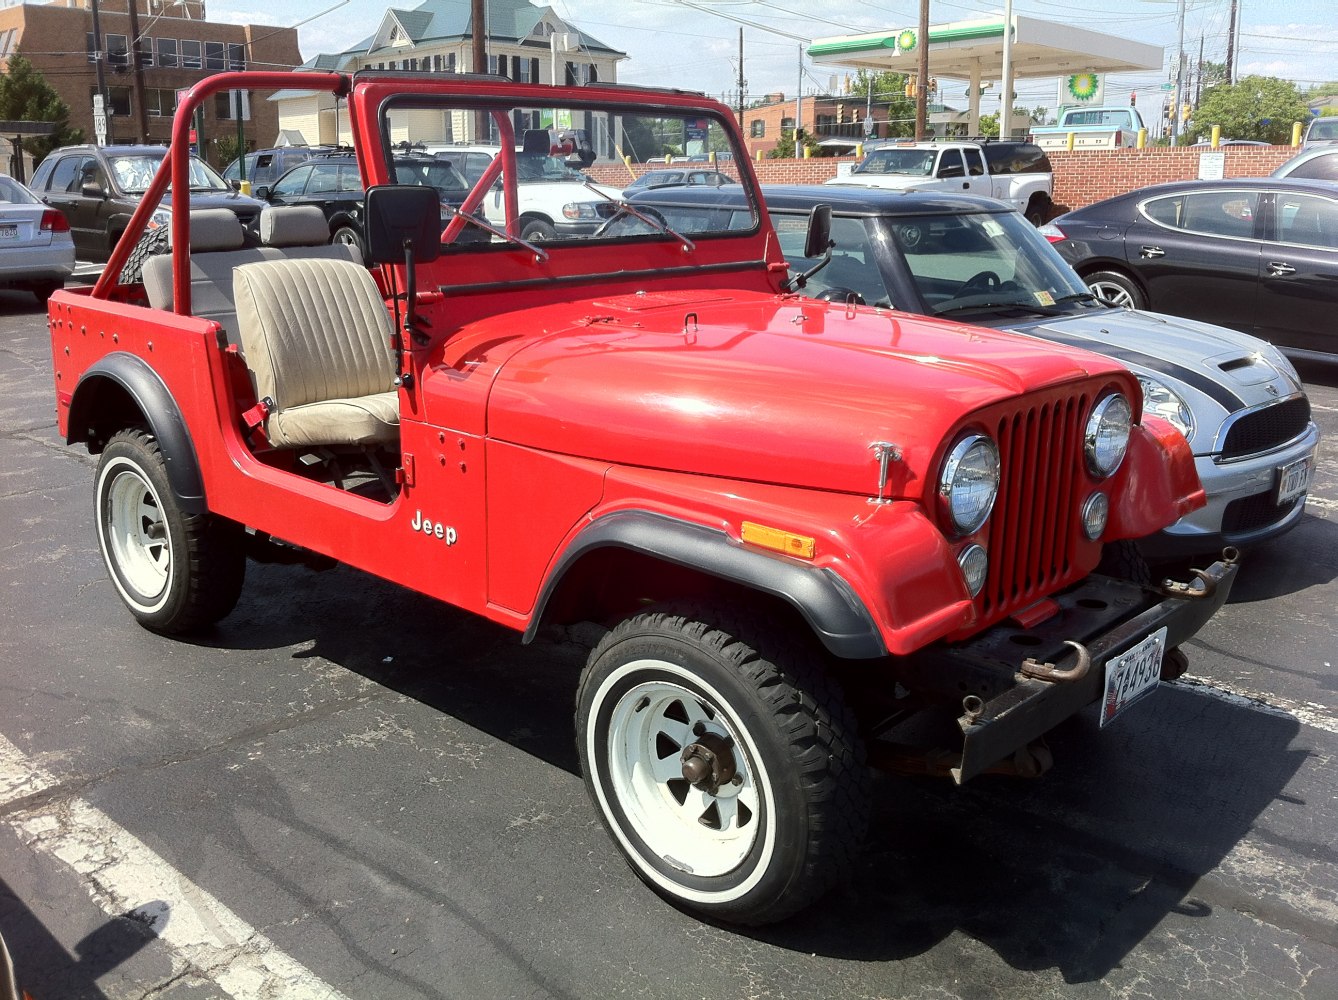 https://totalrenting.es/wp-content/uploads/2022/10/jeep-cj-7-1976-3-8-100-cv-todoterreno.png